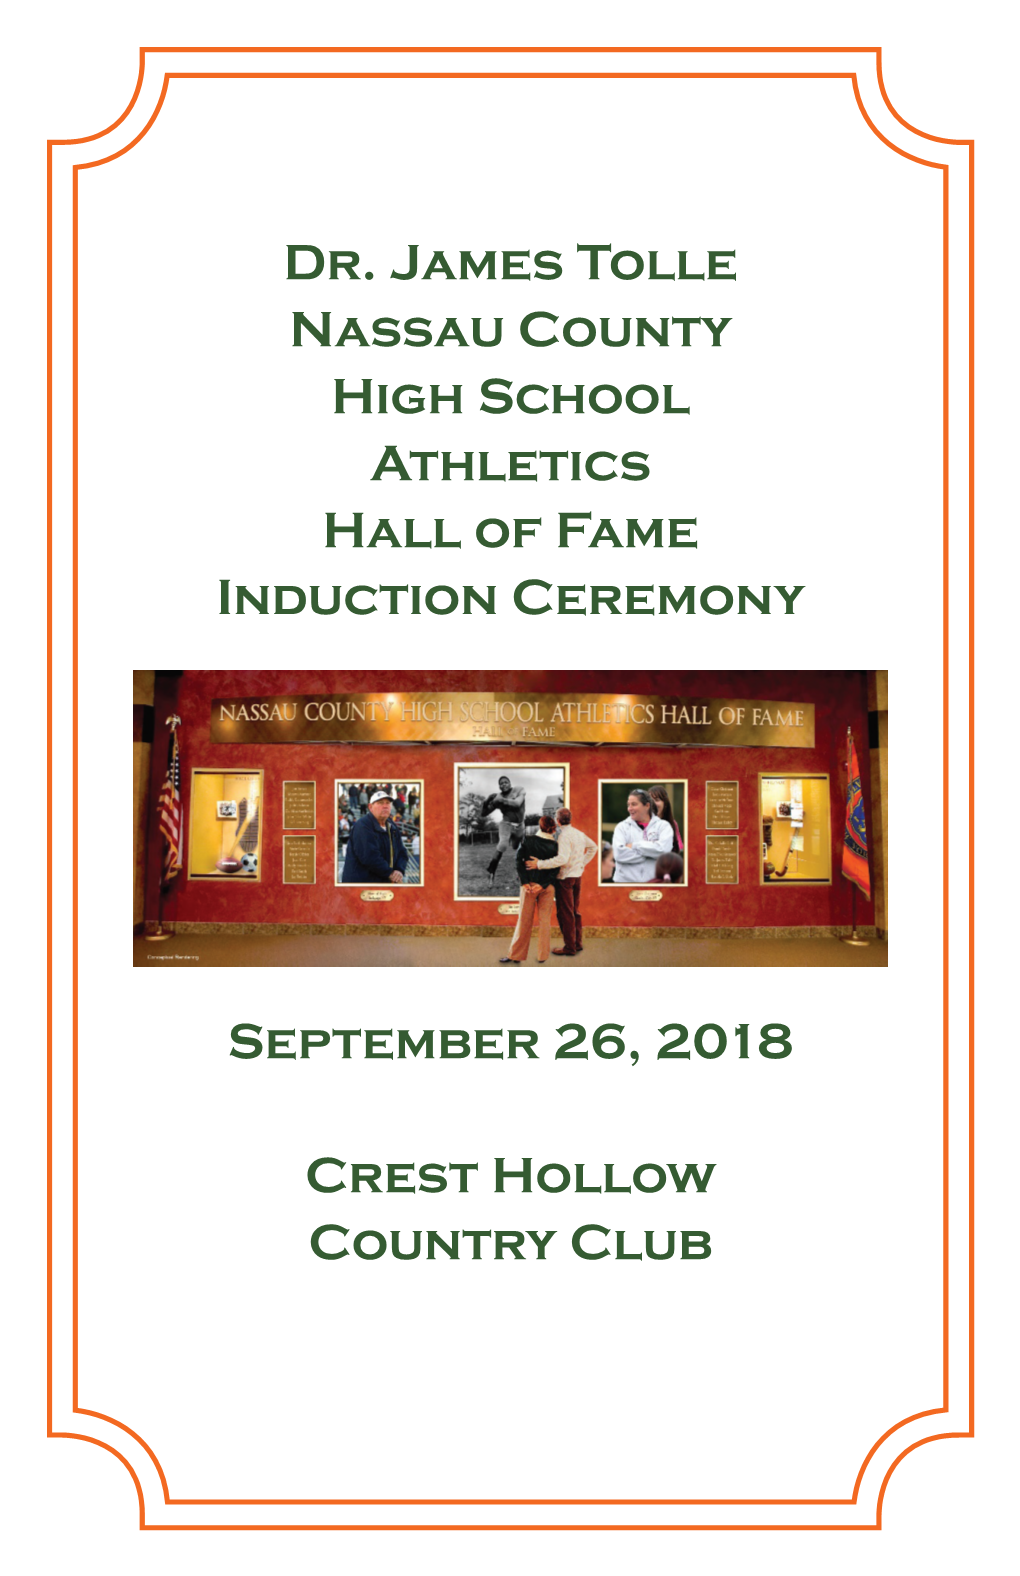 Dr. James Tolle Nassau County High School Athletics Hall of Fame Induction Ceremony